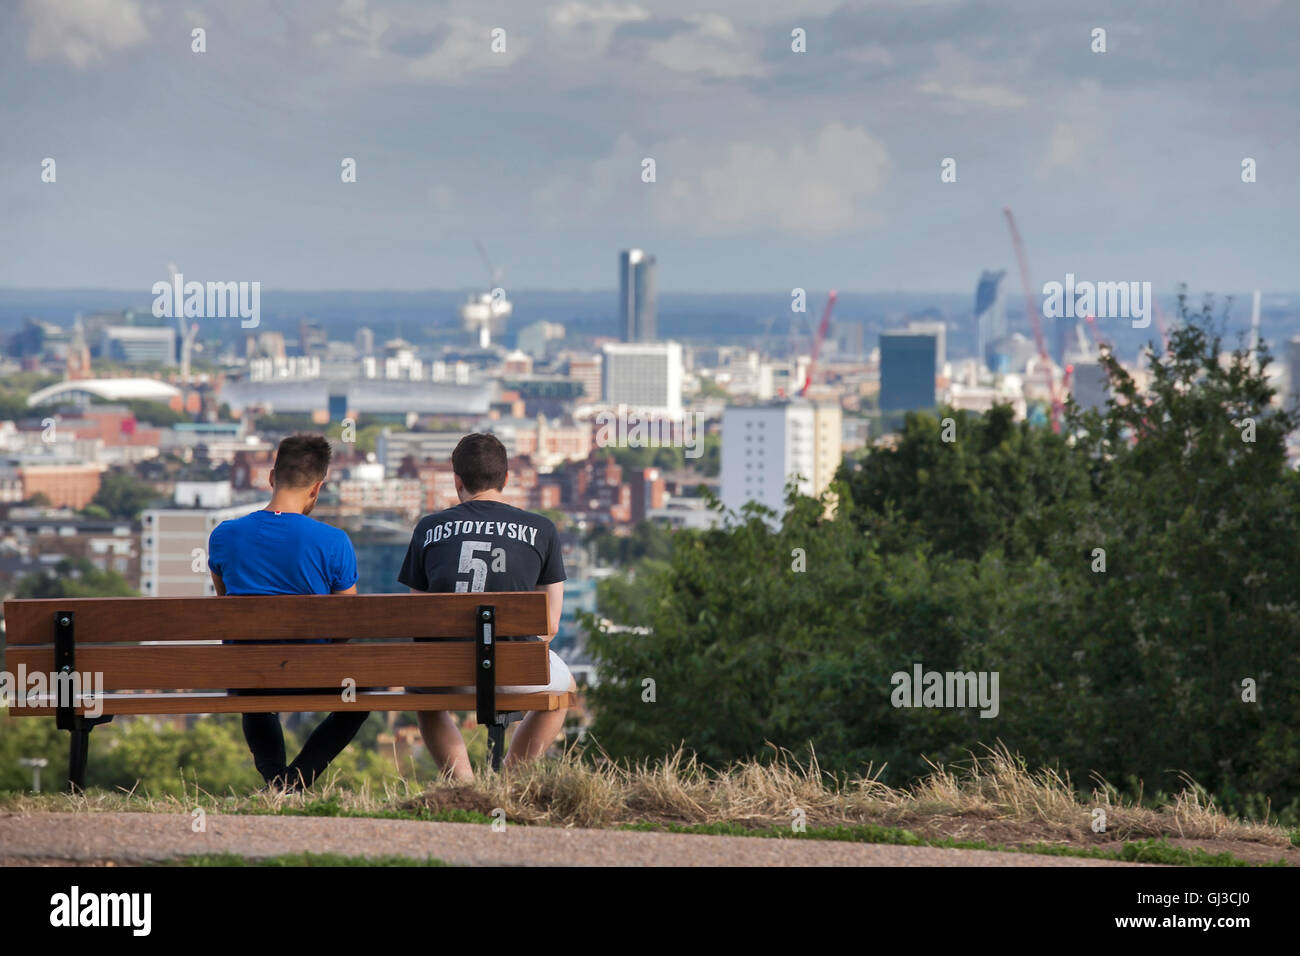 LONDON - MAY 10, 2015. Two men in T-shirt with "Dostoevsky" sign sitting on bench, admiring the view of London in Primrose Hill Stock Photo